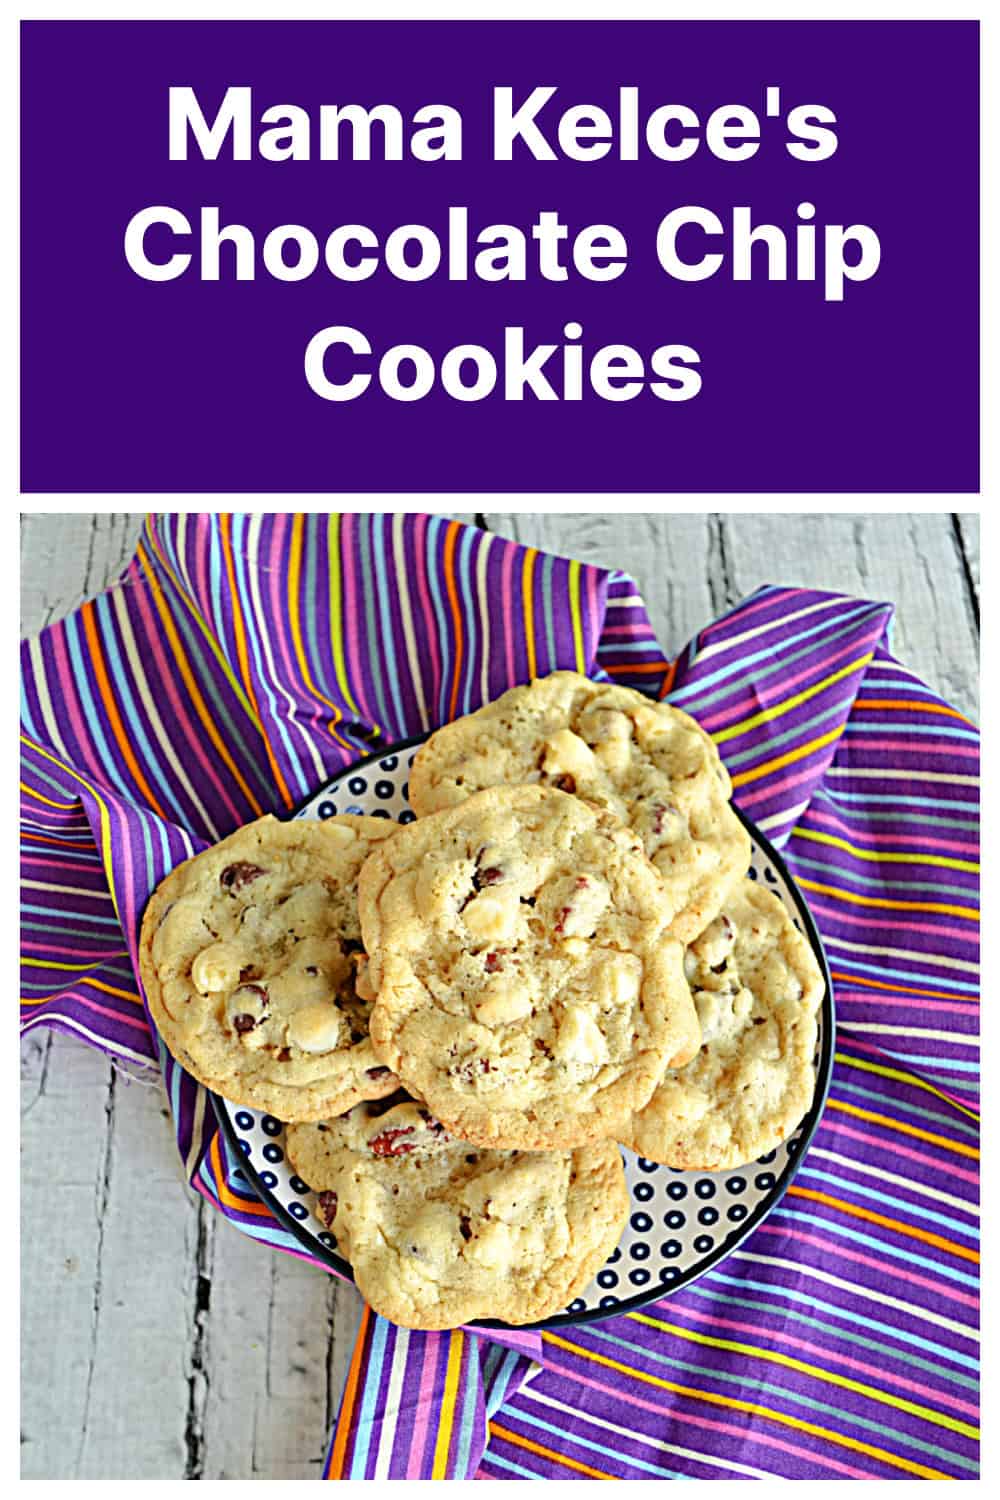 Pin Image: Text title, a plate of chocolate chip cookies.